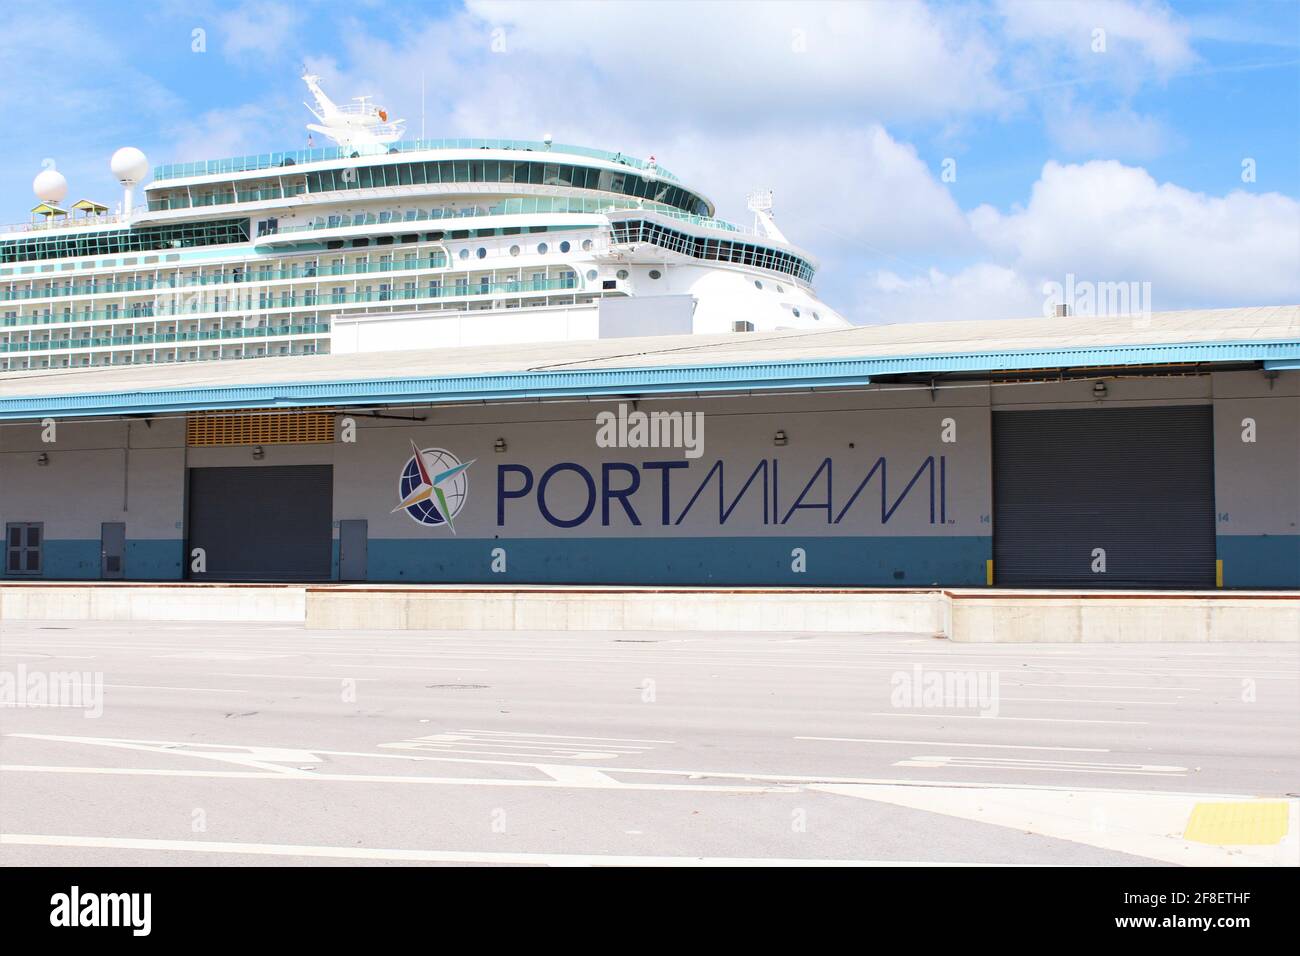 Port of Miami sign on a building where a large cruise ship is parked behind. Cruises have not been operating since the COVID-19 pandemic. Stock Photo